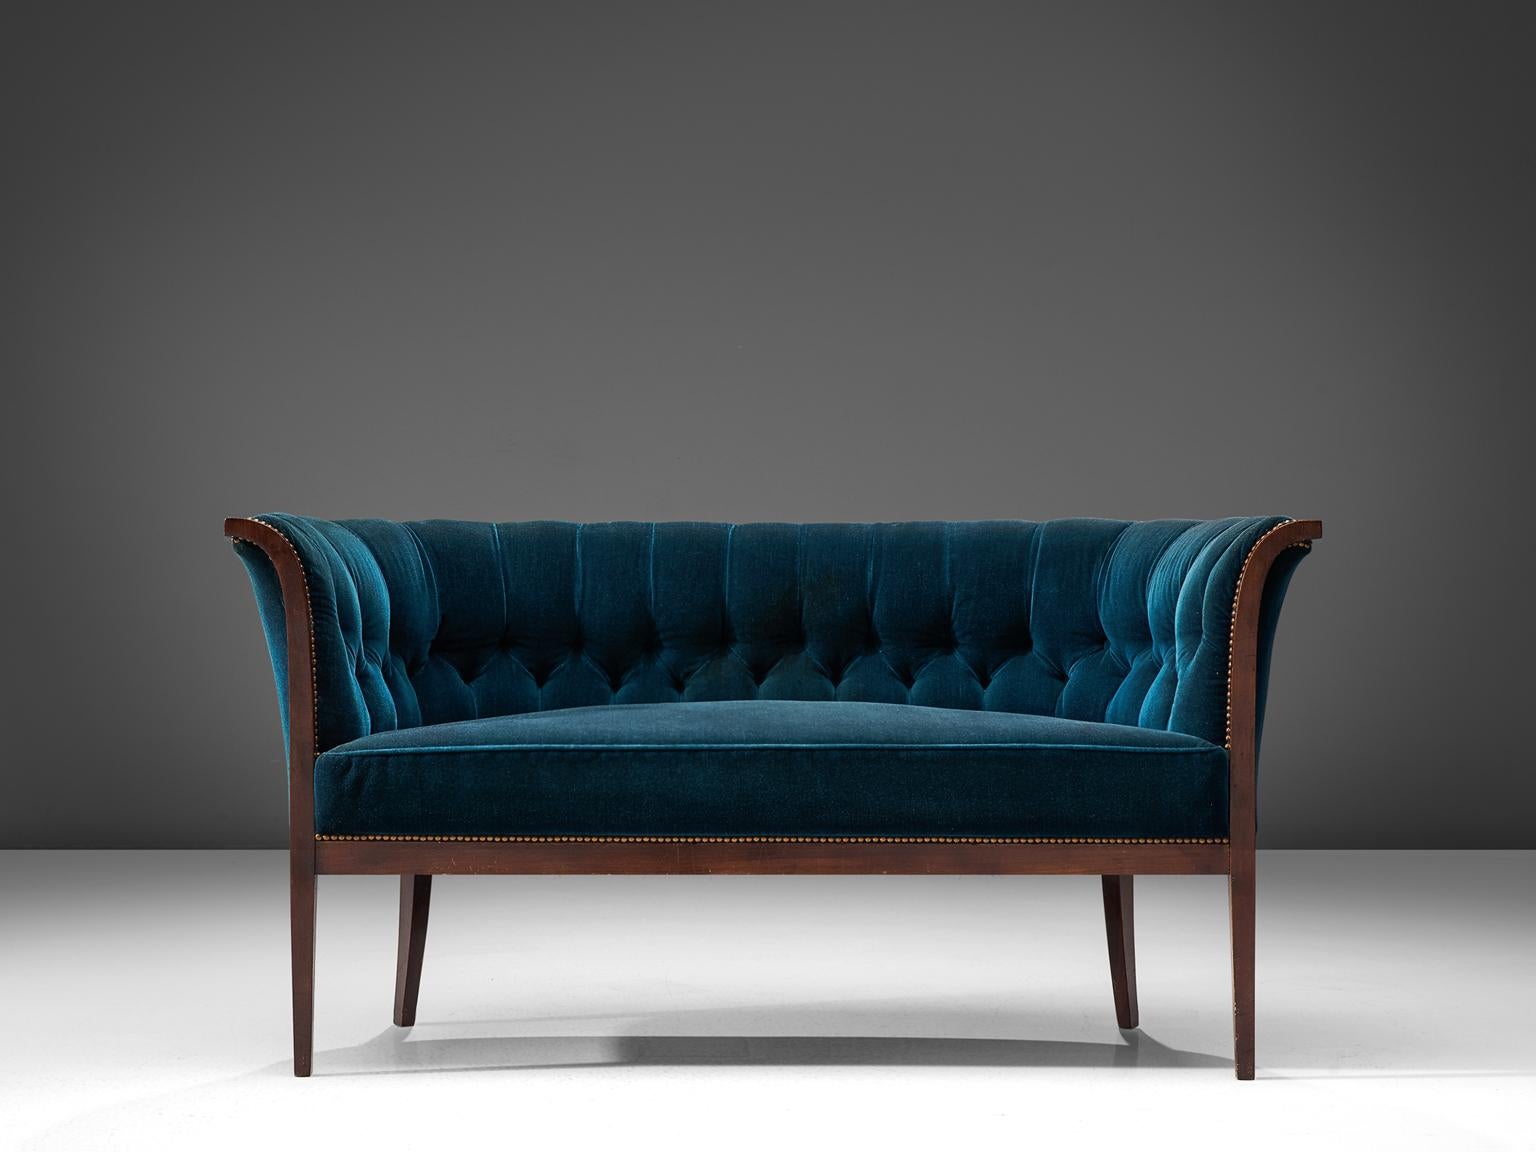 Three-seat sofa, blue velvet upholstery, wood, Denmark, 1940s

This velvet blue Danish sofa features a backrest that is tufted and the seat is executed in one piece. The seat is thick and comfortable. The defining features of this piece are the